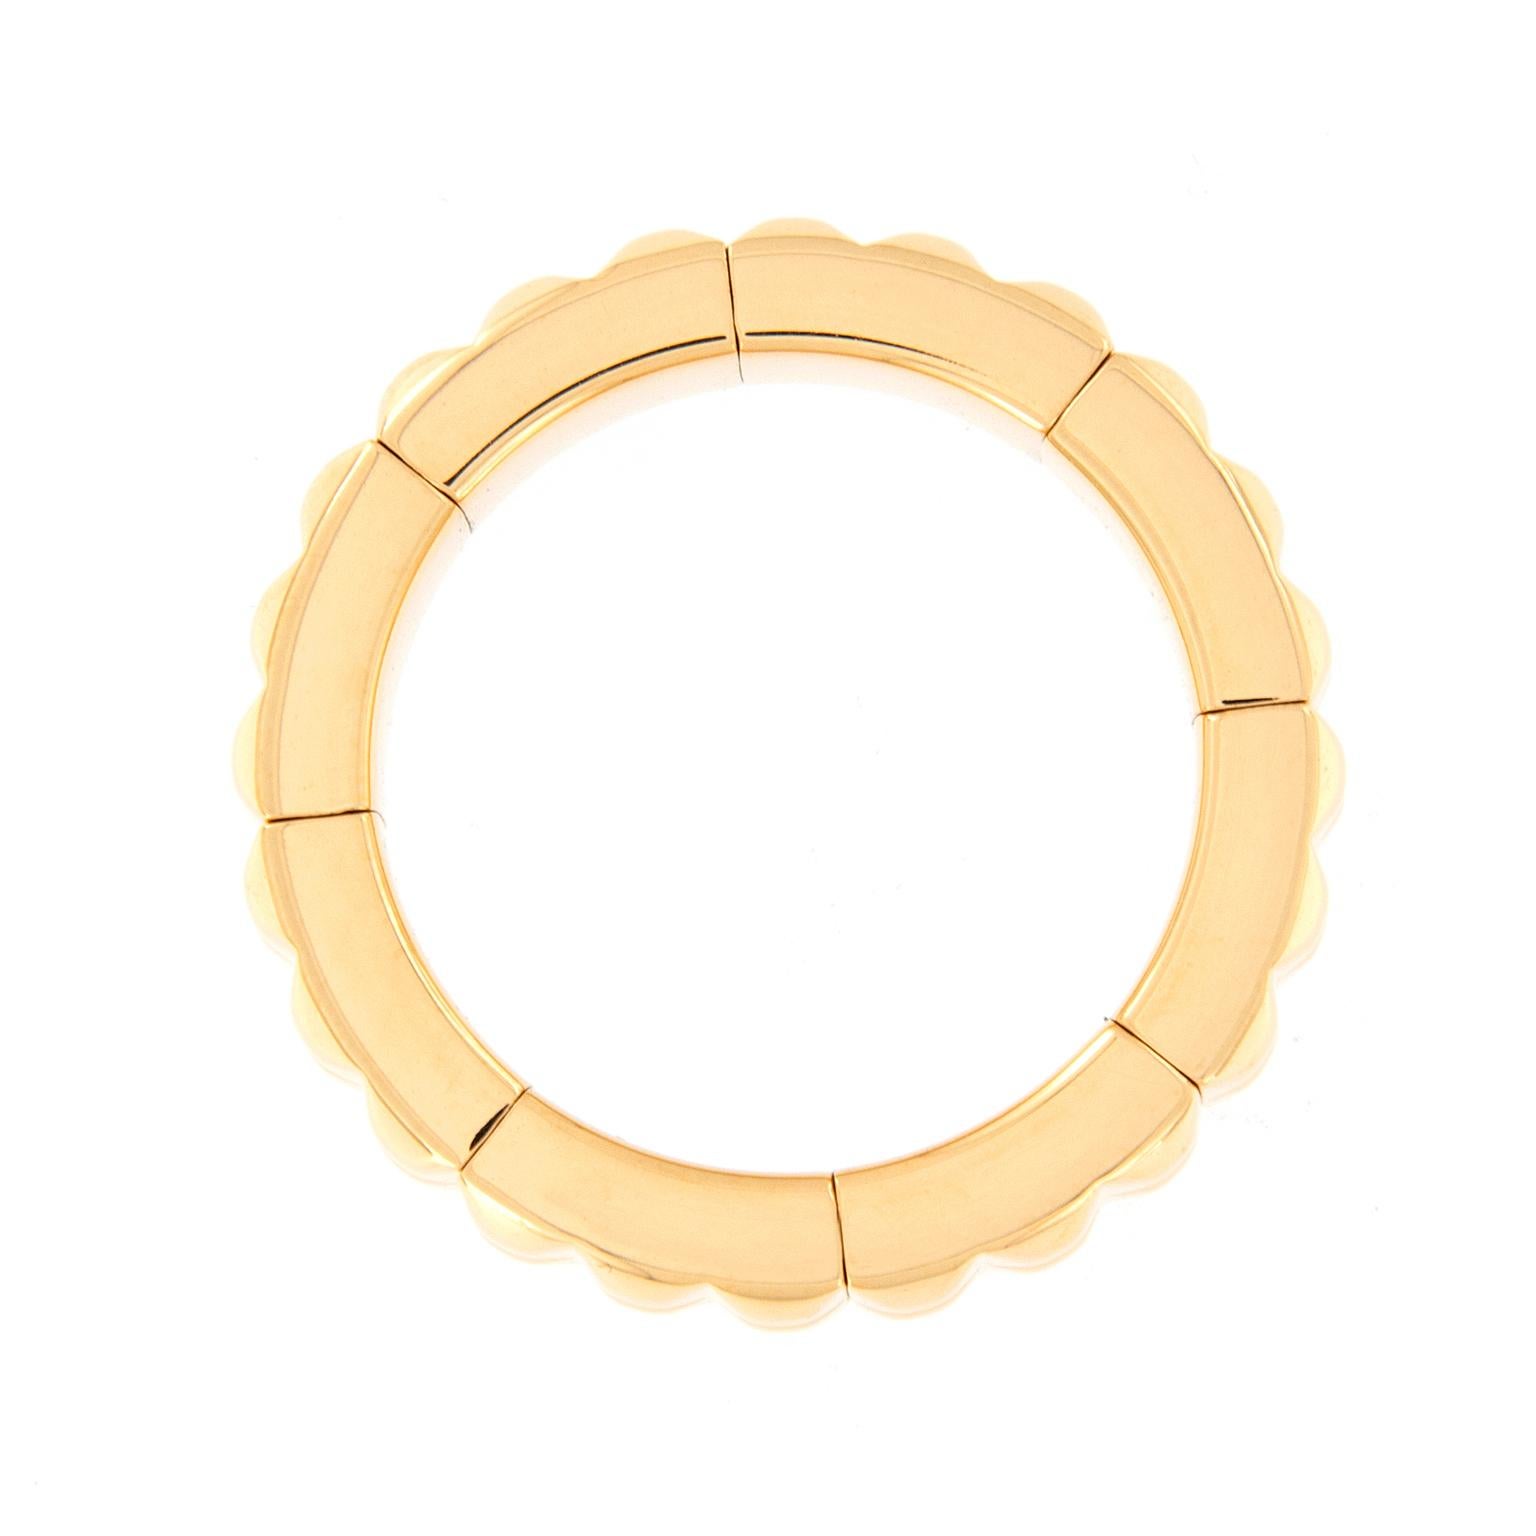 This contemporary flexible band ring is designed for comfort and perfectly fits one’s finger. The ring is crafted in 18k yellow gold and band can stretch up to 1.5 in size. The ring is great for stacking and would complement an engagement ring. Ring